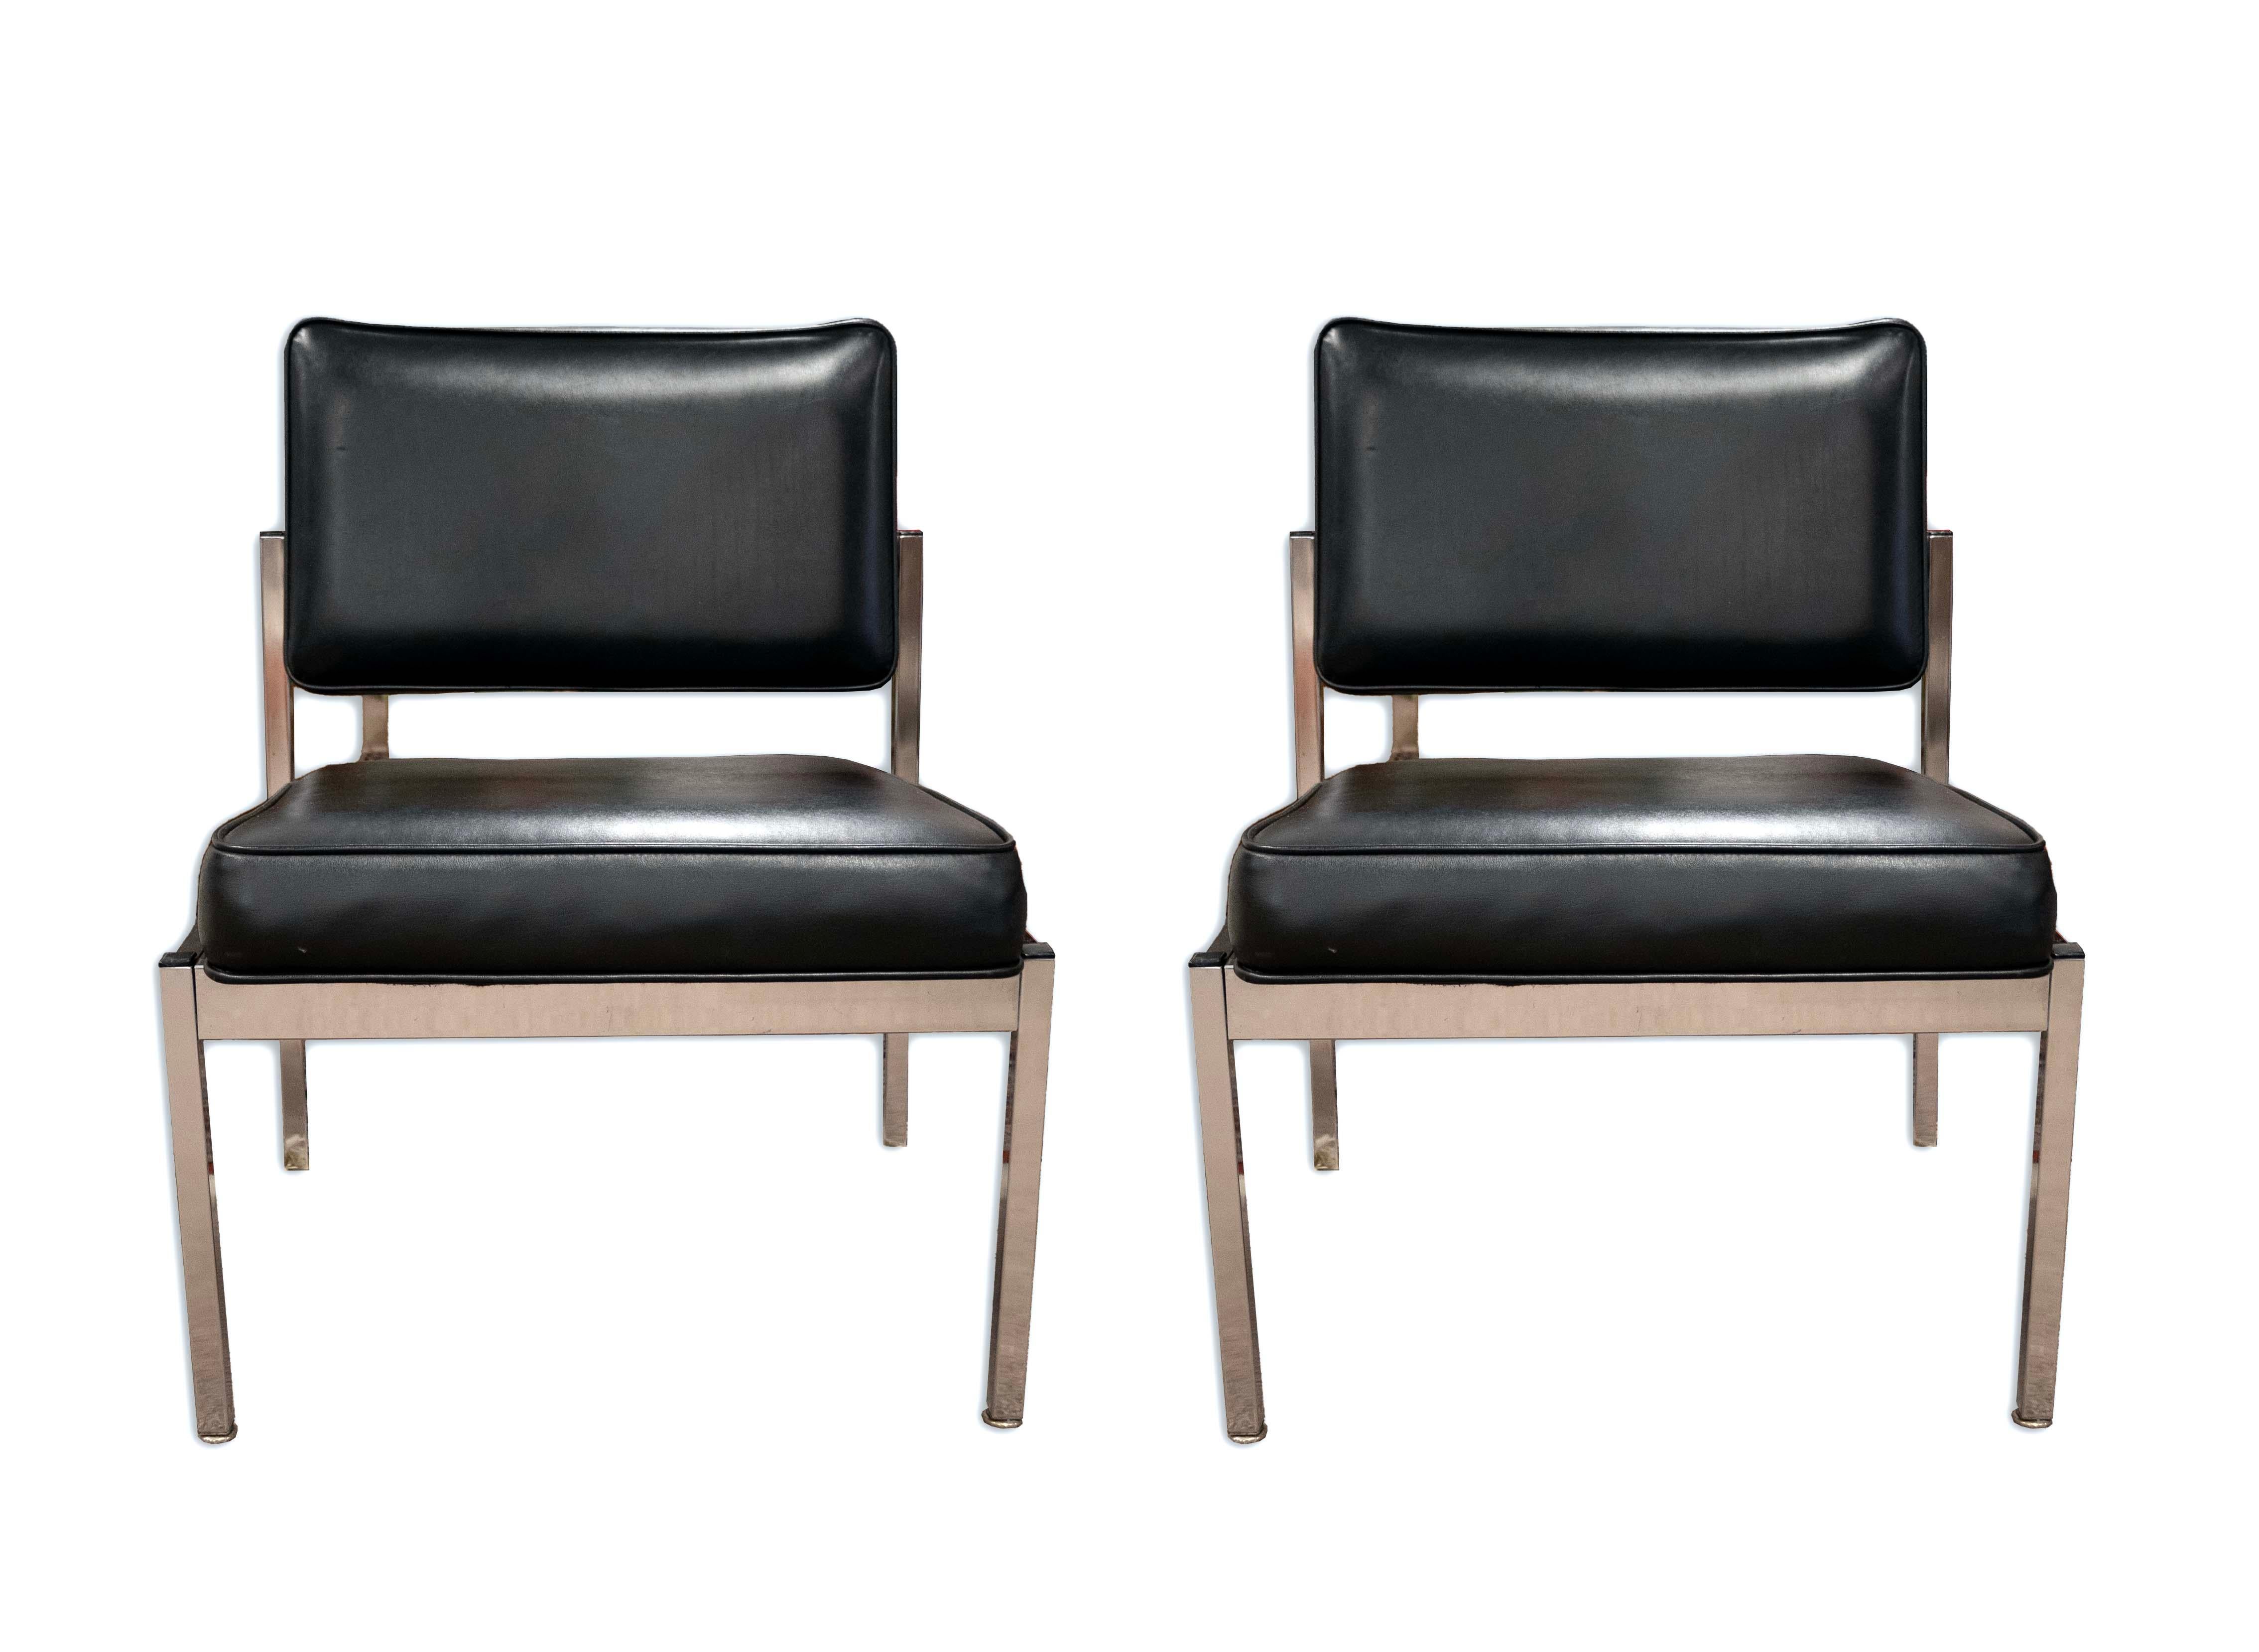 A pair of “Slipper Chairs” designed by Florence Knoll. Circa 1960s. Brushed stainless steel frames upholstered in black leather. Classic mid-century modern design feature sturdy frames with a sleek chrome finish, thickly padded, and comfortable